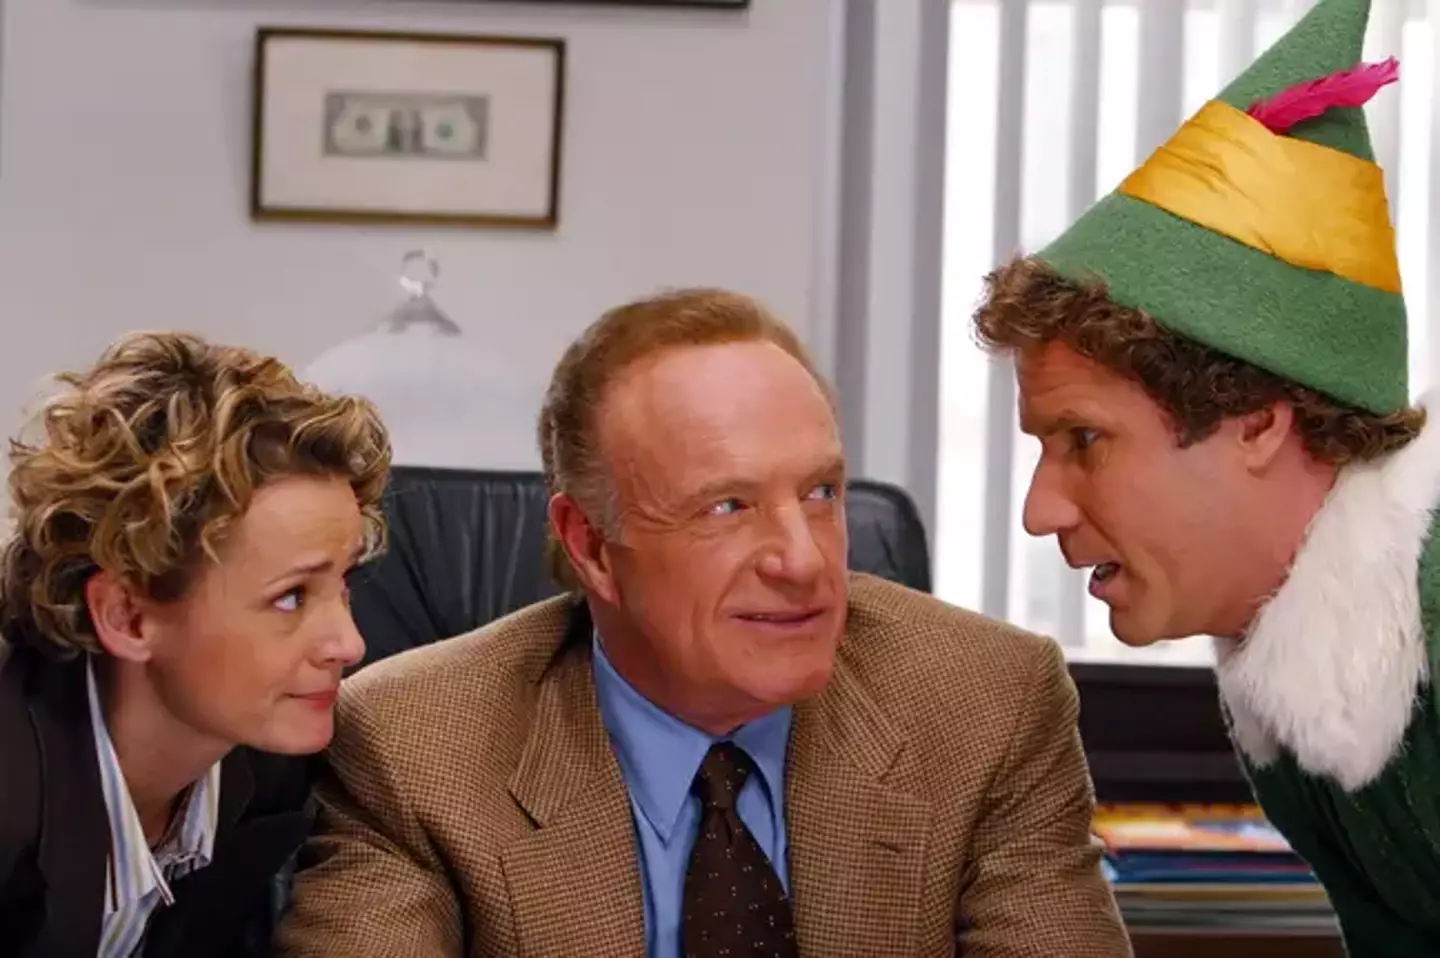 From left: Amy Sedaris, James Caan, and Will Ferrell in Theron's favourite movie Elf.